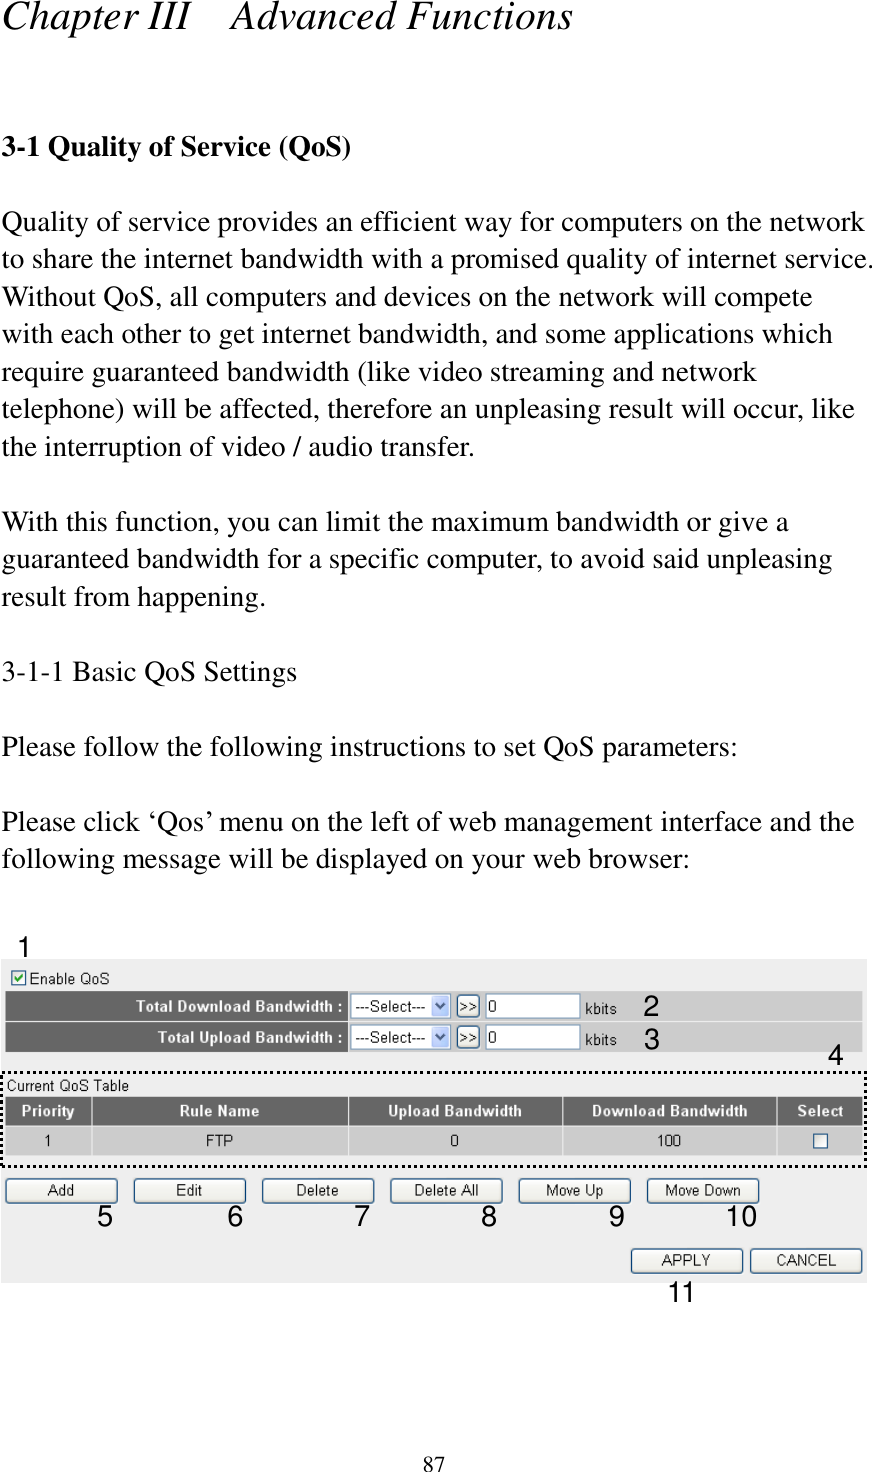 87 Chapter III    Advanced Functions  3-1 Quality of Service (QoS)  Quality of service provides an efficient way for computers on the network to share the internet bandwidth with a promised quality of internet service. Without QoS, all computers and devices on the network will compete with each other to get internet bandwidth, and some applications which require guaranteed bandwidth (like video streaming and network telephone) will be affected, therefore an unpleasing result will occur, like the interruption of video / audio transfer.    With this function, you can limit the maximum bandwidth or give a guaranteed bandwidth for a specific computer, to avoid said unpleasing result from happening.  3-1-1 Basic QoS Settings  Please follow the following instructions to set QoS parameters:  Please click „Qos‟ menu on the left of web management interface and the following message will be displayed on your web browser:       1 2 3 4 5 6 7 8 9 10 11 